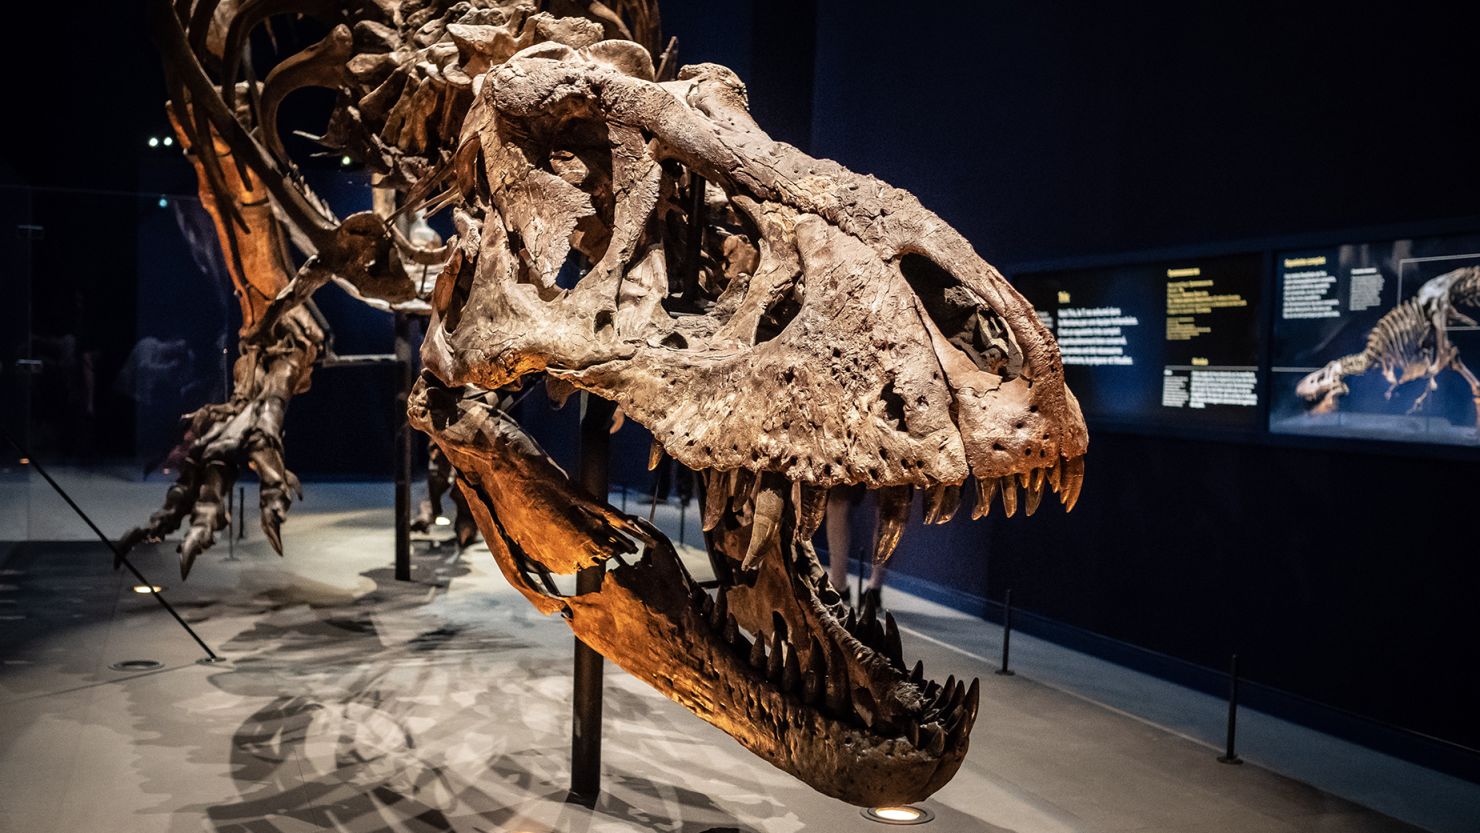 Some dinosaurs, such as the T. rex, may have been warm-blooded, according to a new study.